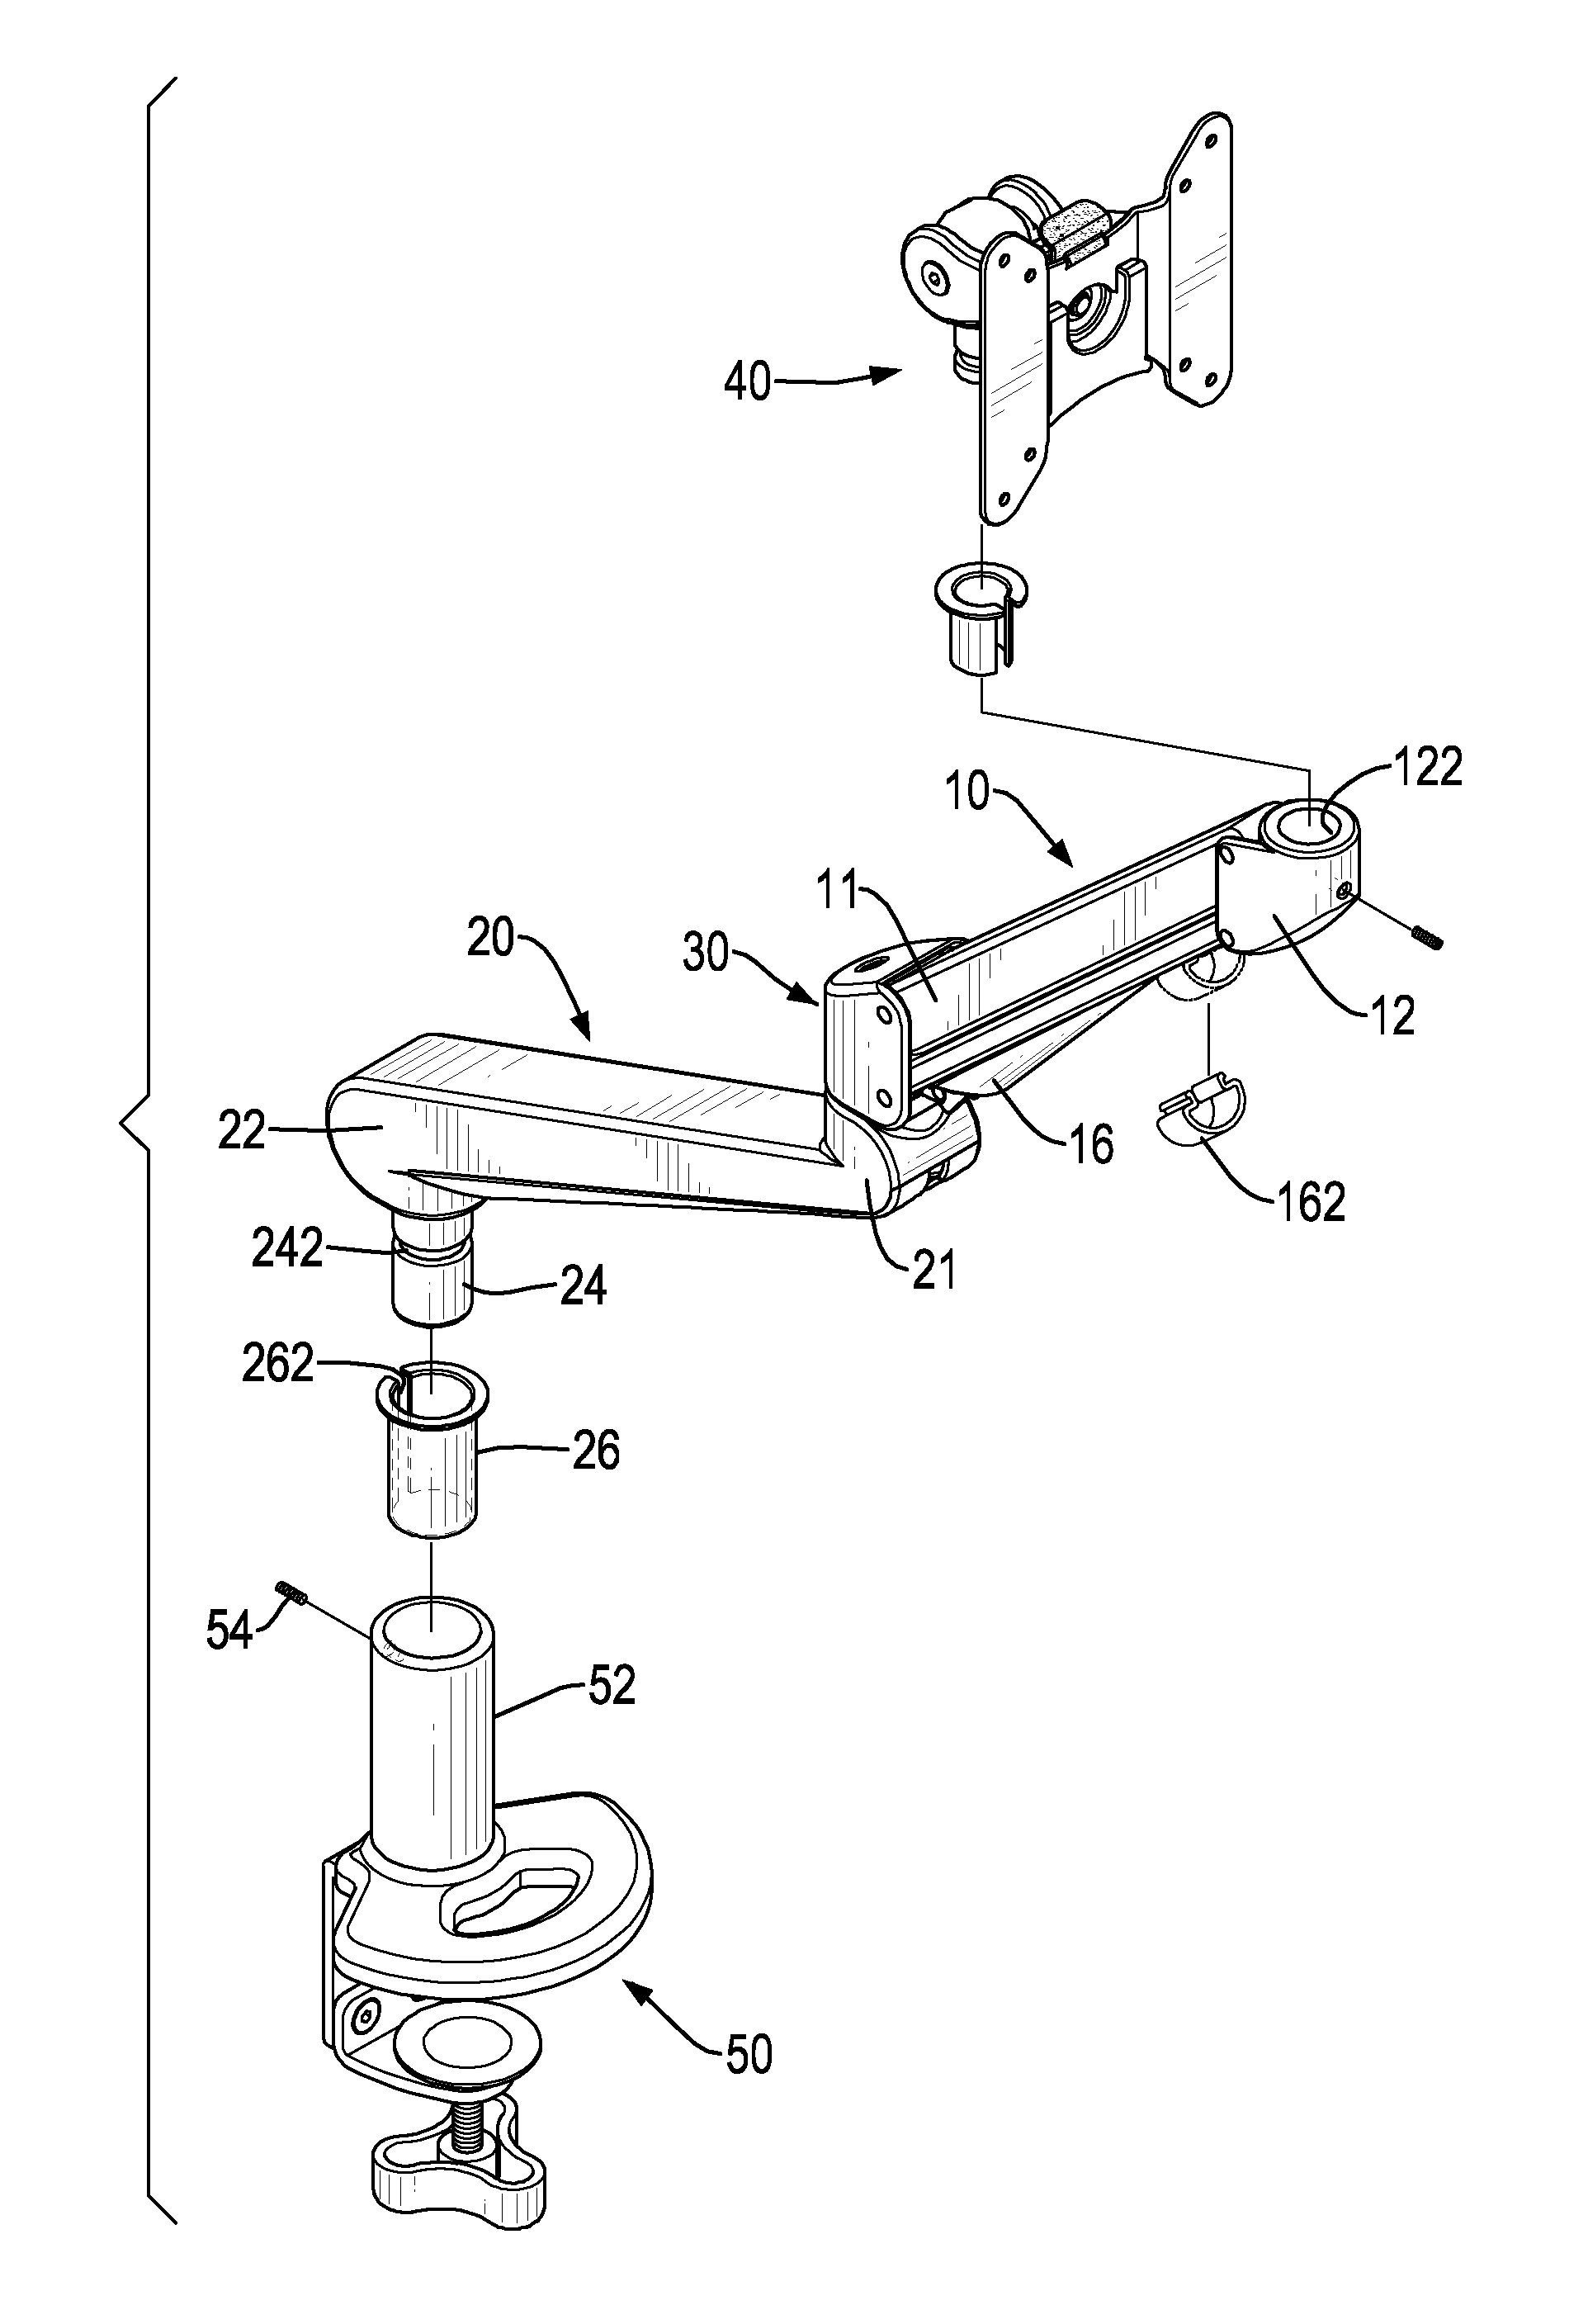 Supporting arm assembly for a display